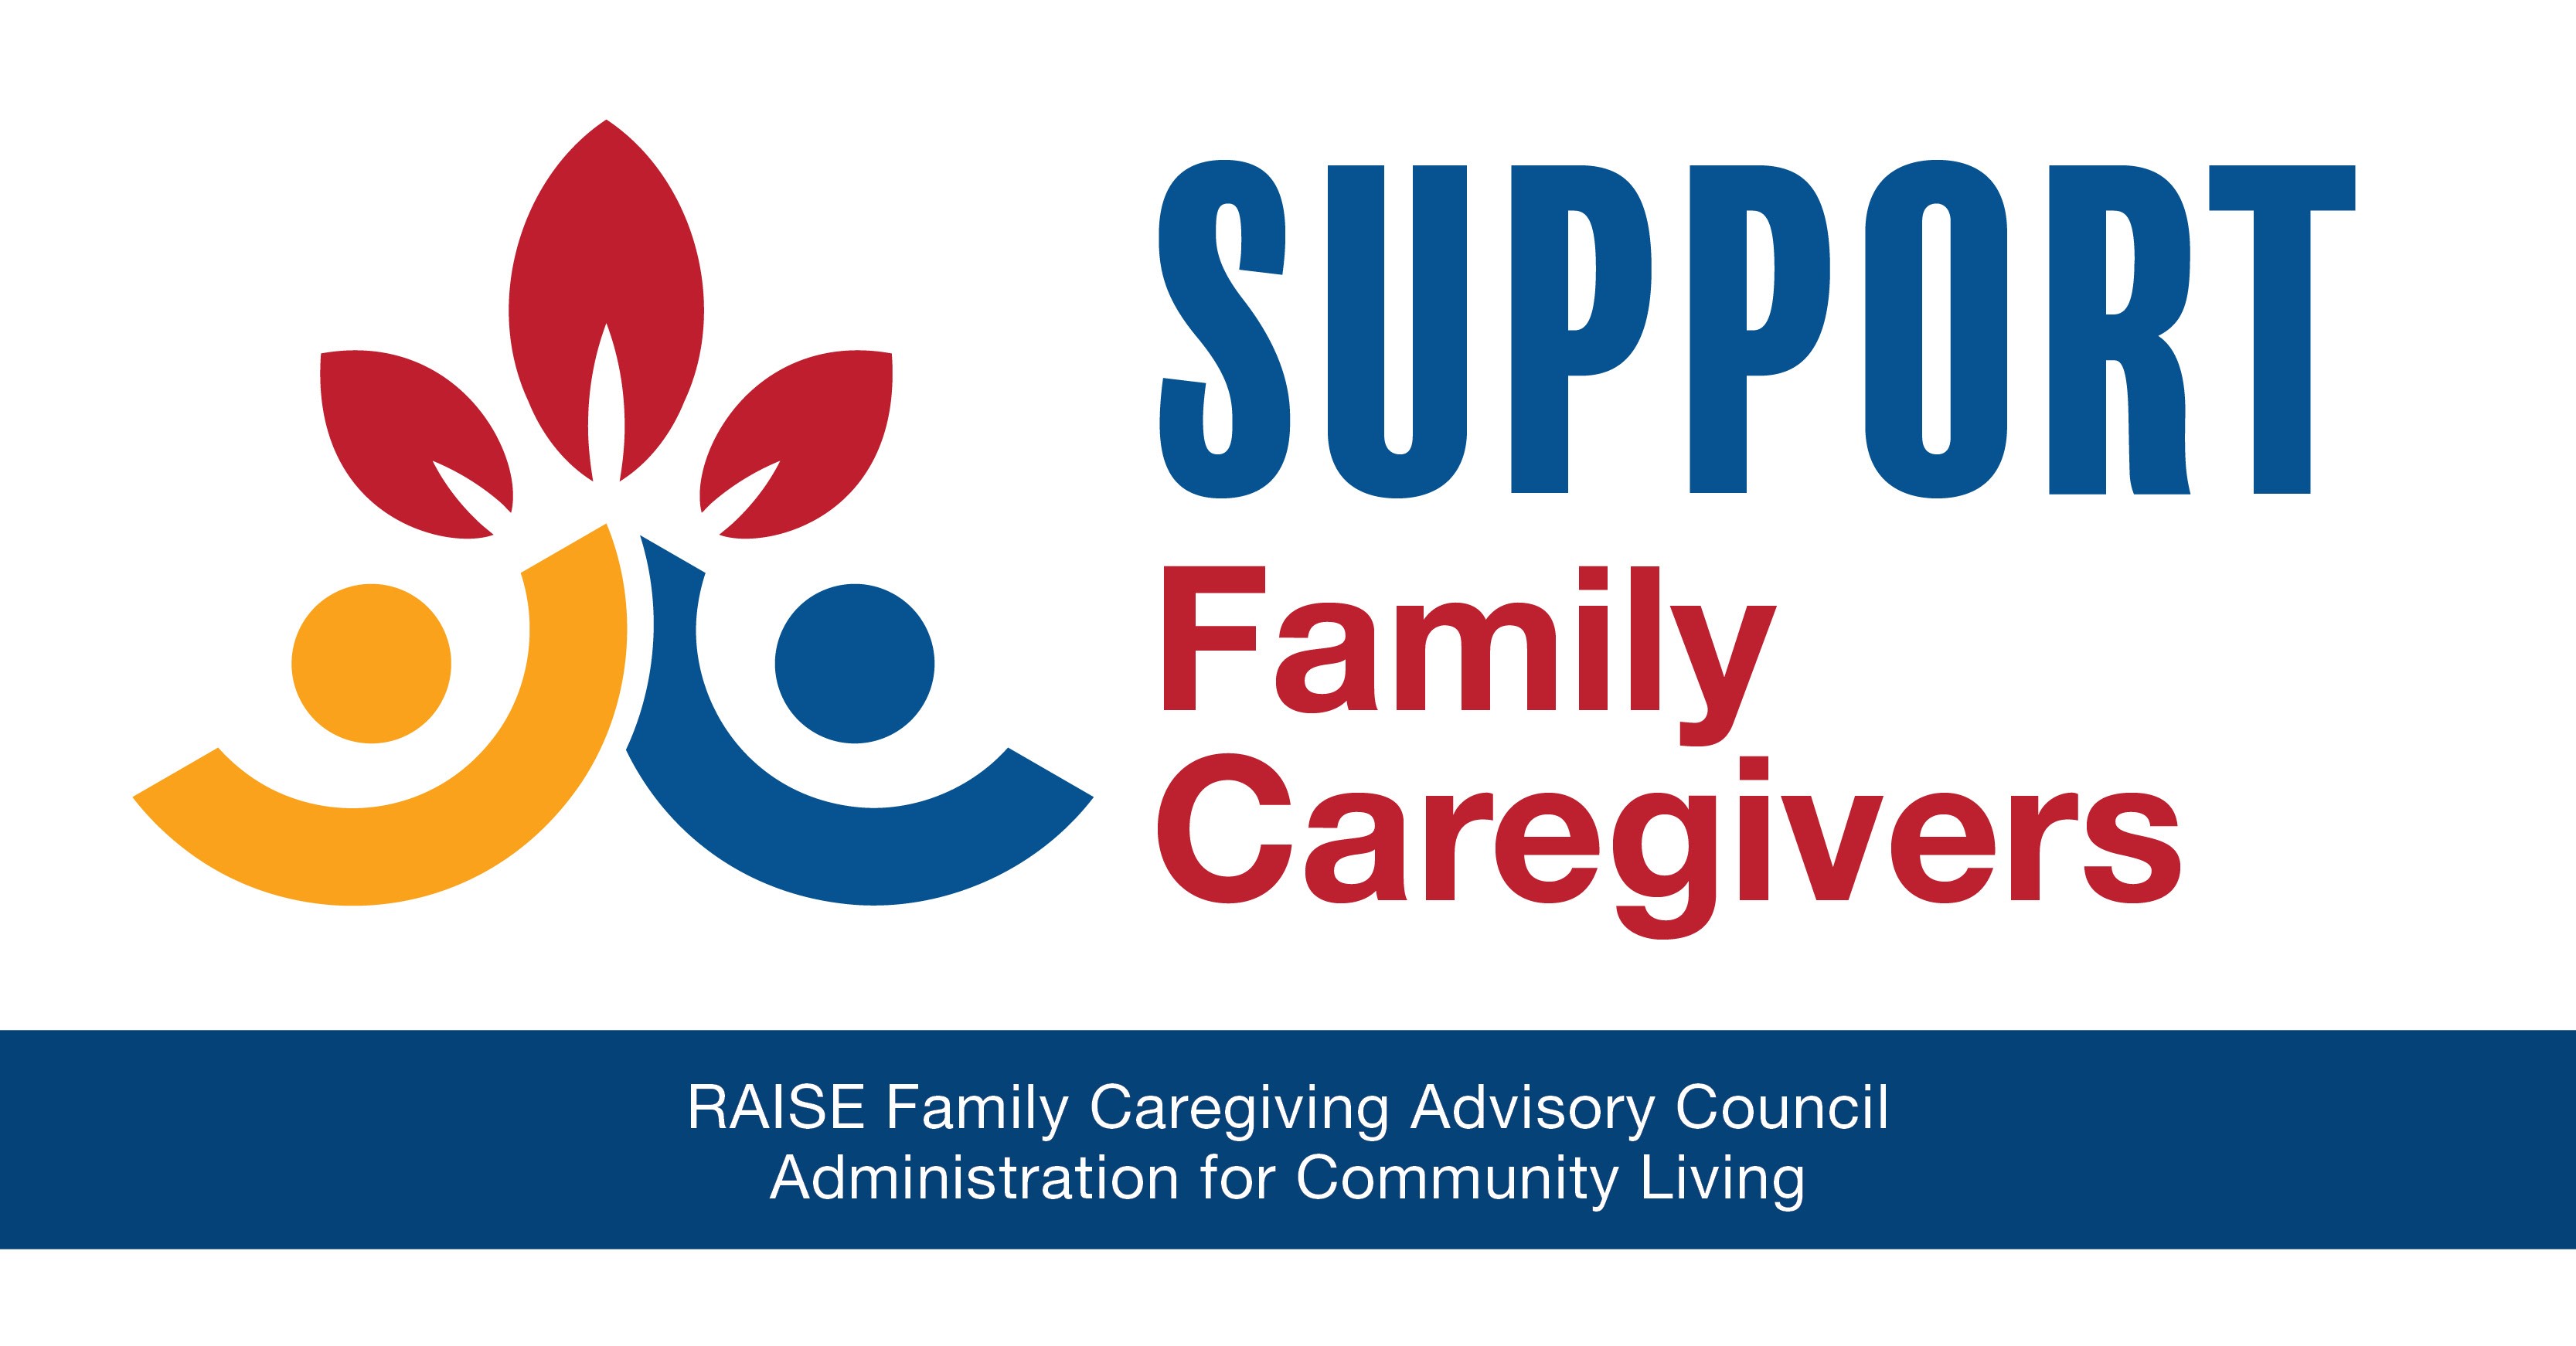 Help RAISE awareness of caregiving issues | ACL Administration for ...